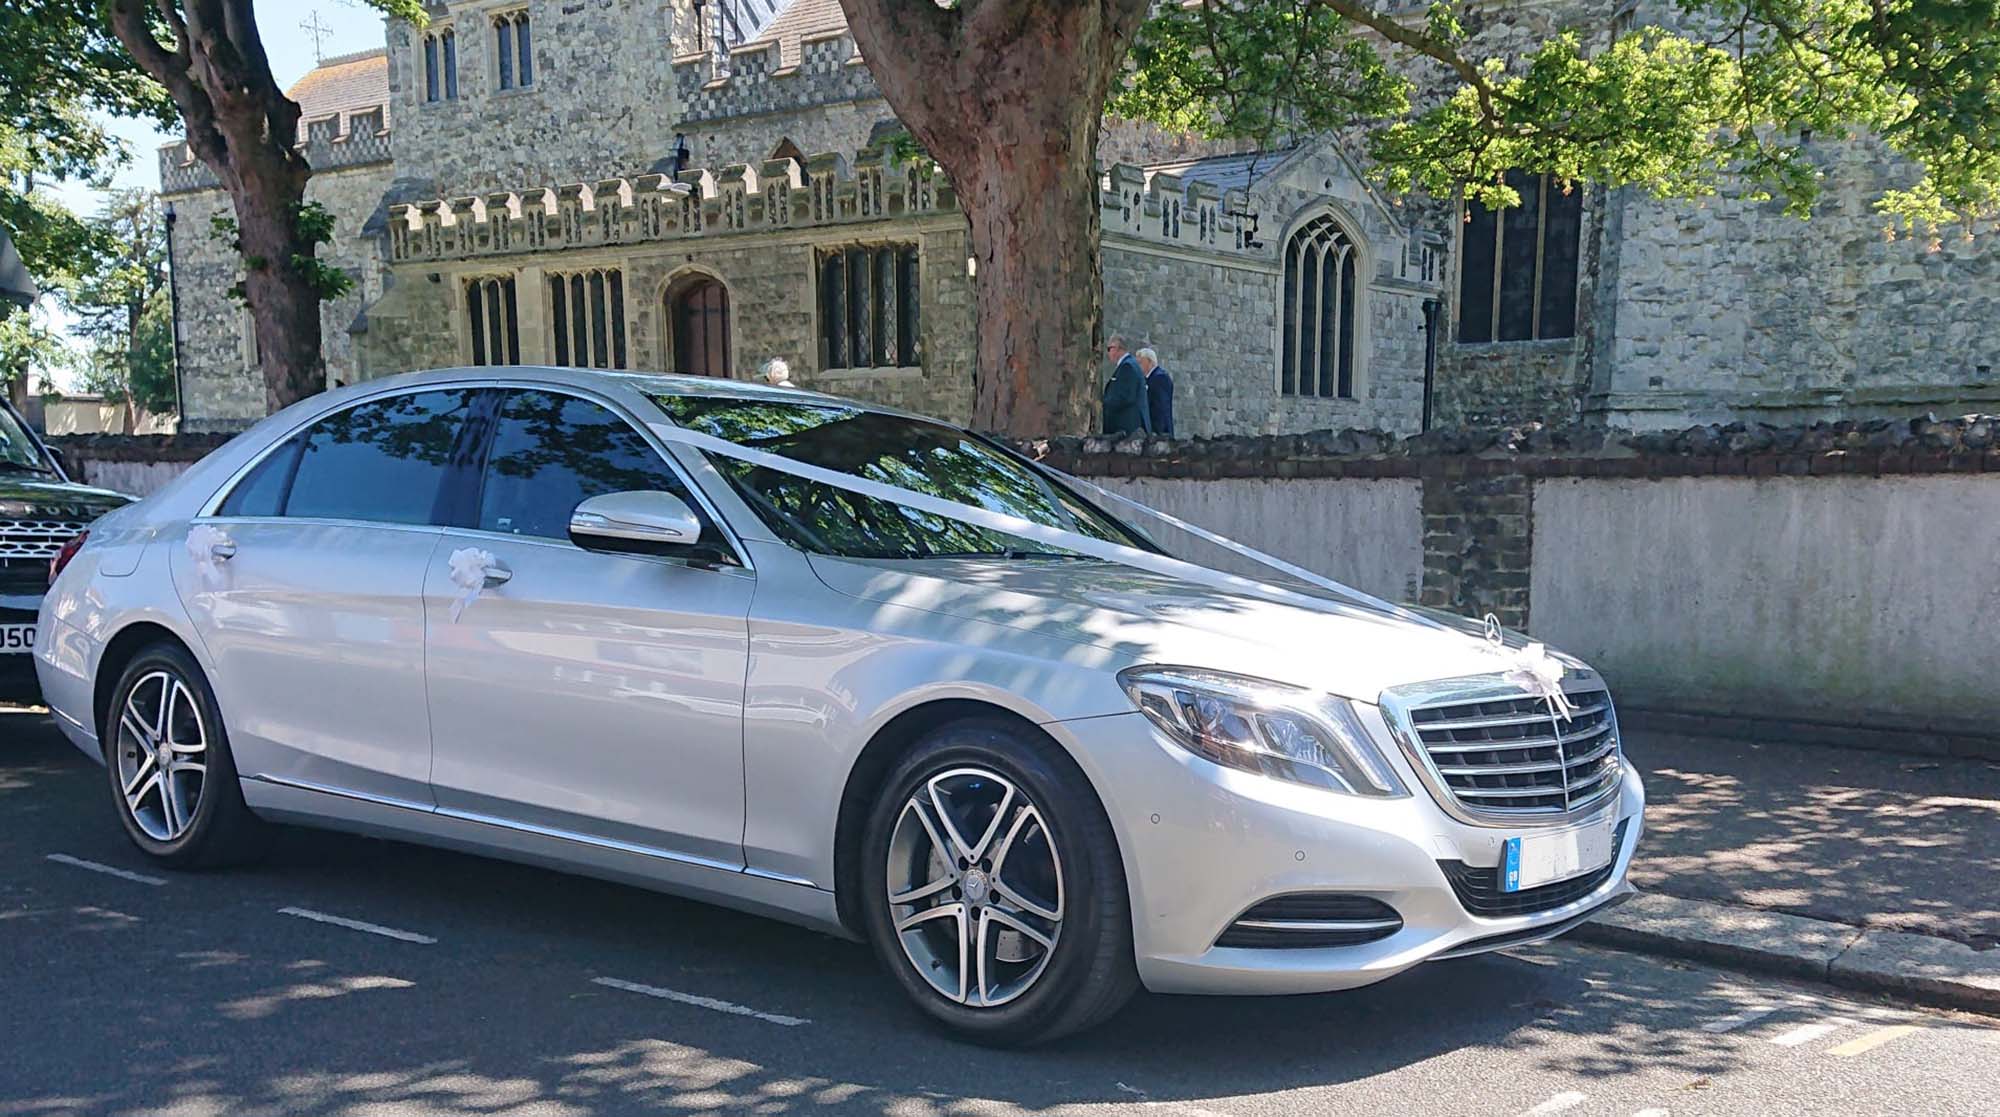 Sliver Mercedes S class parked at church